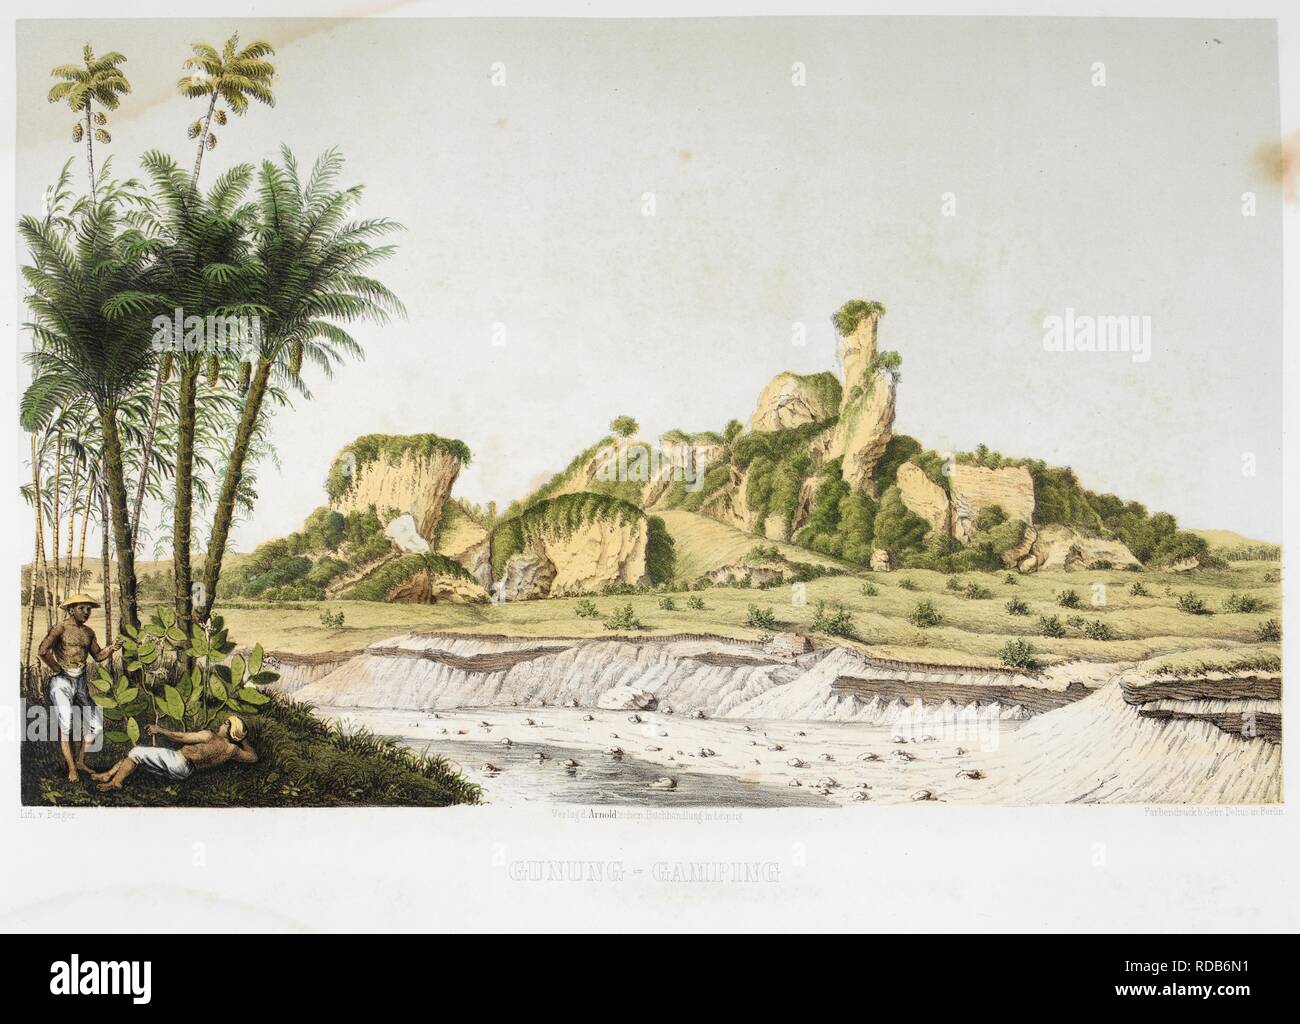 Gunung Gamping. A view of a rocky landscape. Natives can be seen in the foreground. Java Album. Leipzig, 1856. Source: 1781.a.21, plate 3. Language: German. Author: JUNGHUHN, FRANZ WILHELM. Stock Photo